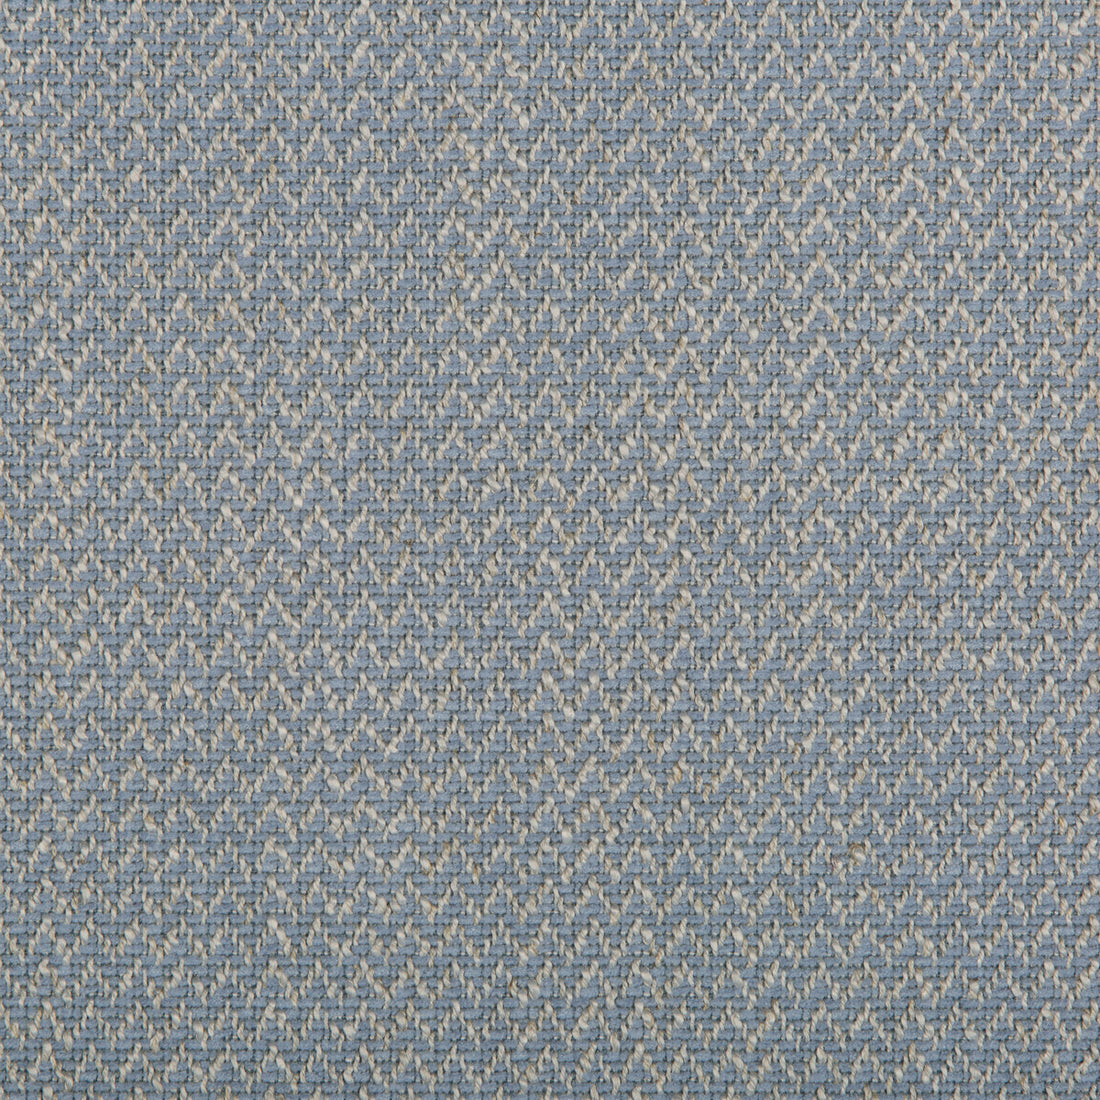 Kravet Contract fabric in 35408-5 color - pattern 35408.5.0 - by Kravet Contract in the Crypton Incase collection